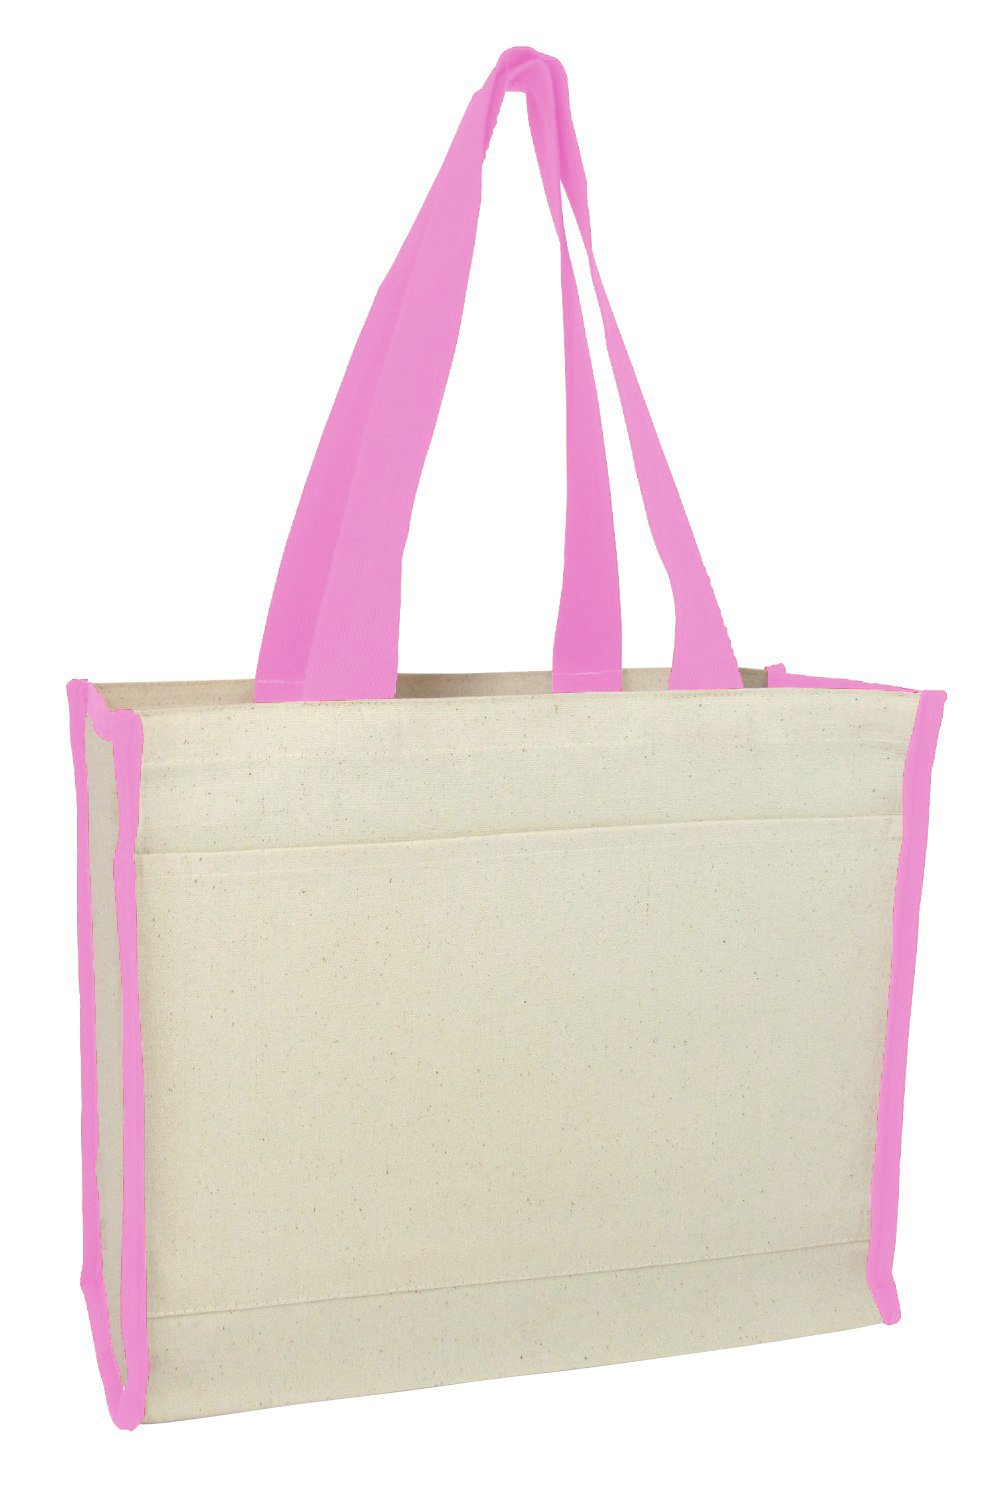 Heavy Canvas Tote Bag with Colored Trim - Alternative Colors